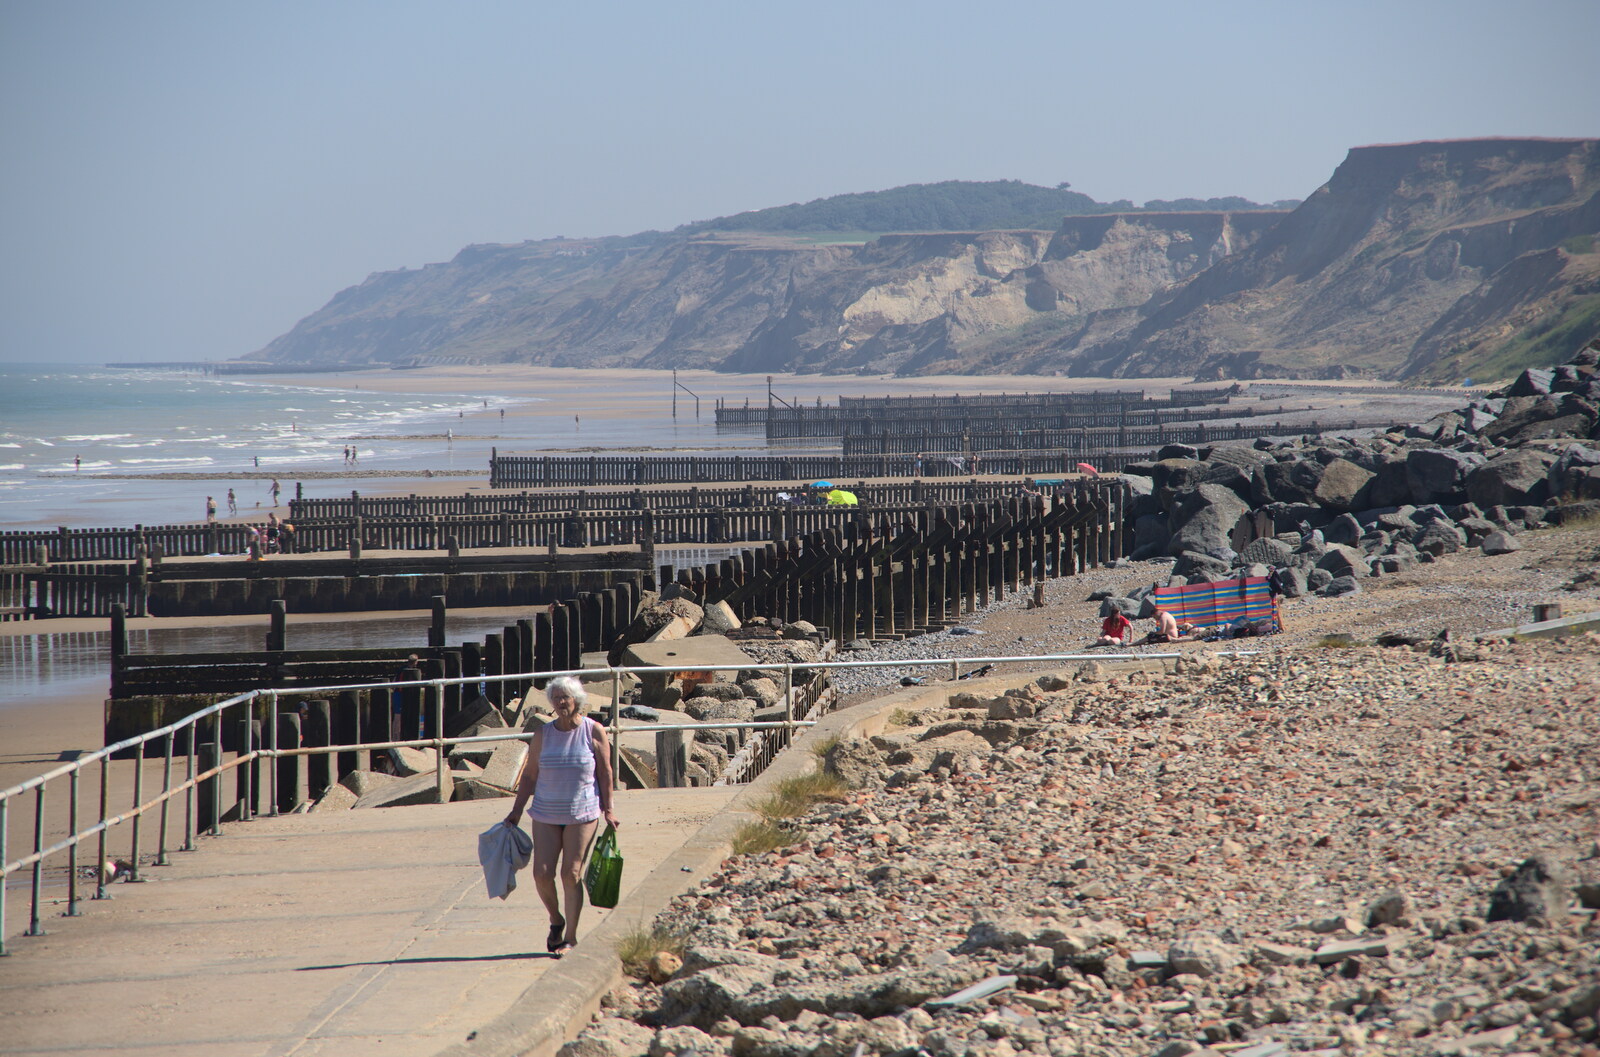 A view along Overstrand beach from Camping at Forest Park, Cromer, Norfolk - 12th August 2022